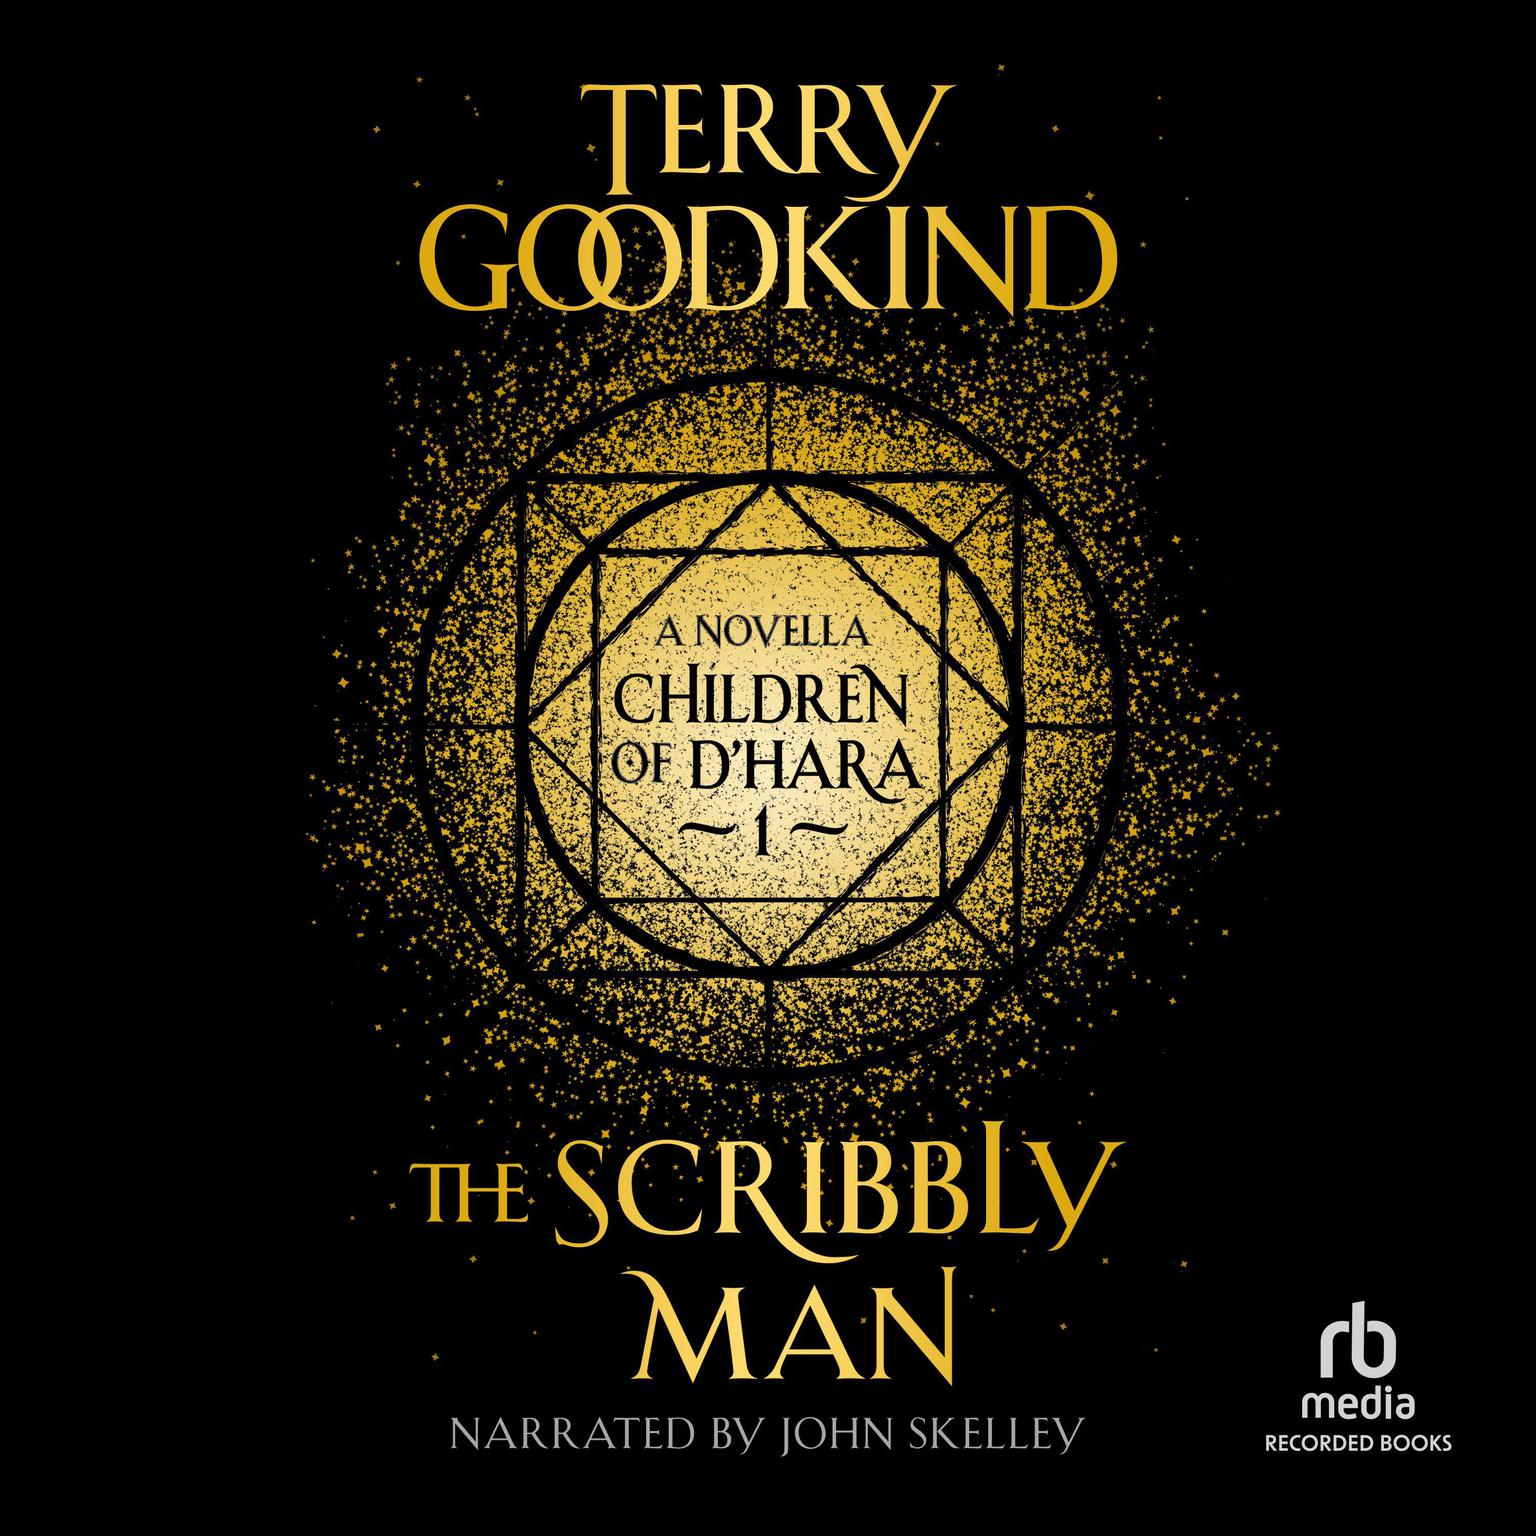 The Scribbly Man Audiobook, by Terry Goodkind